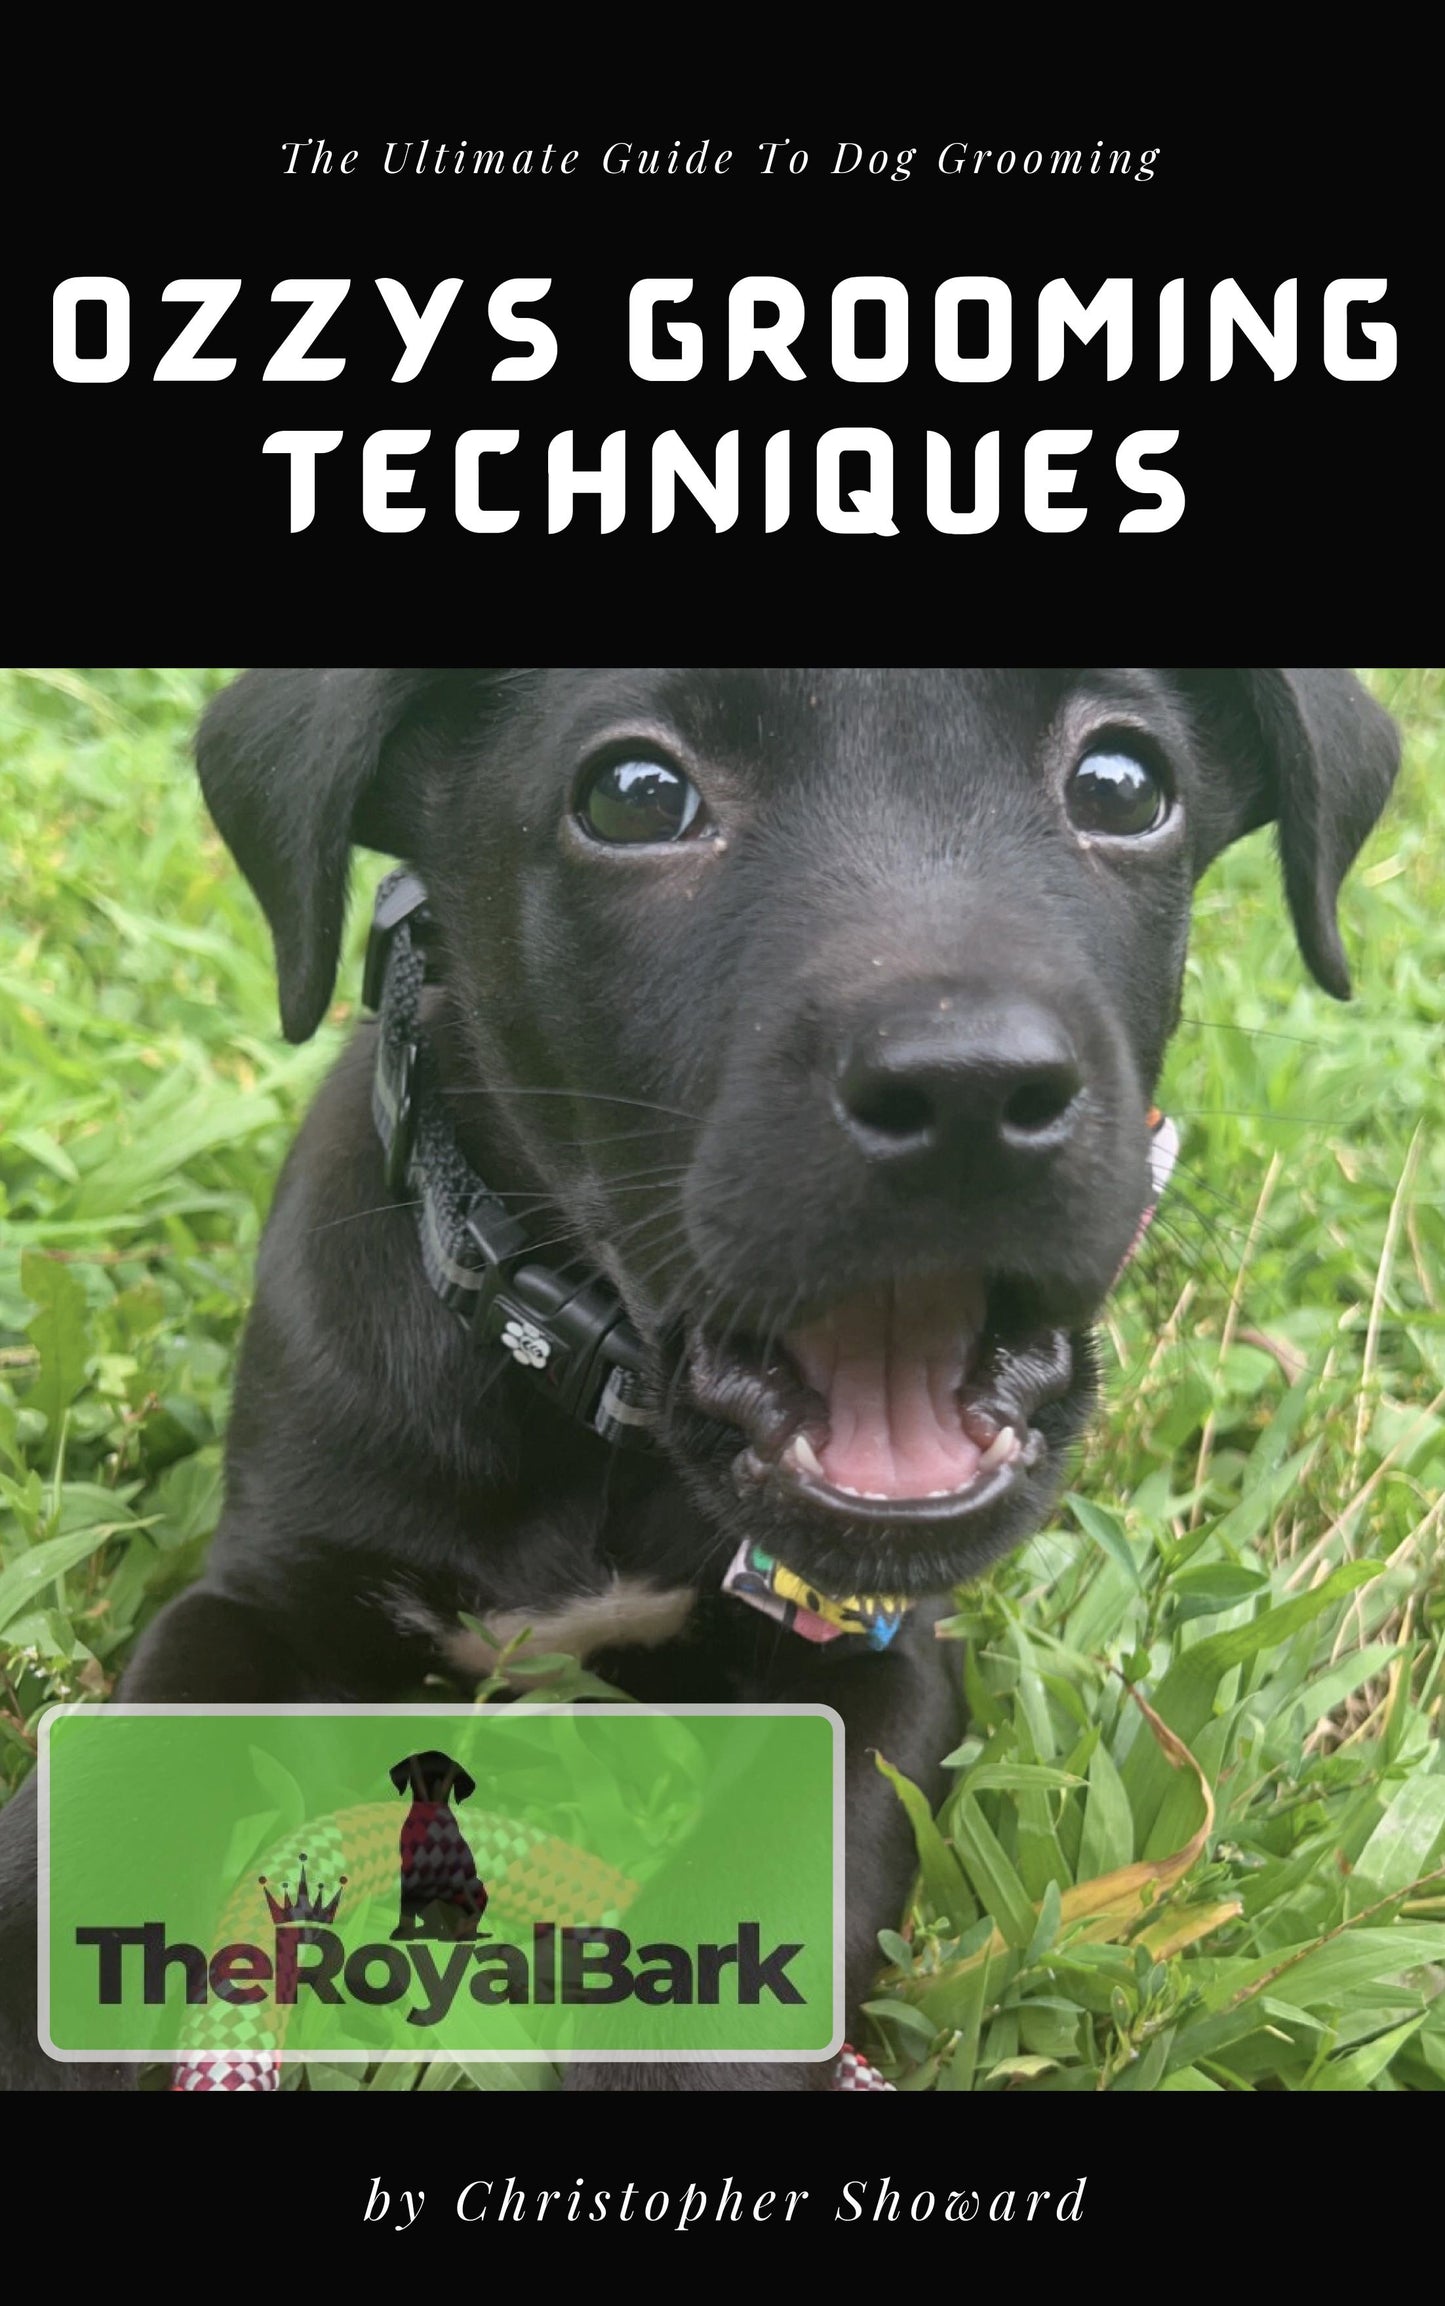 Ozzys Grooming Techniques - FREE eBook!